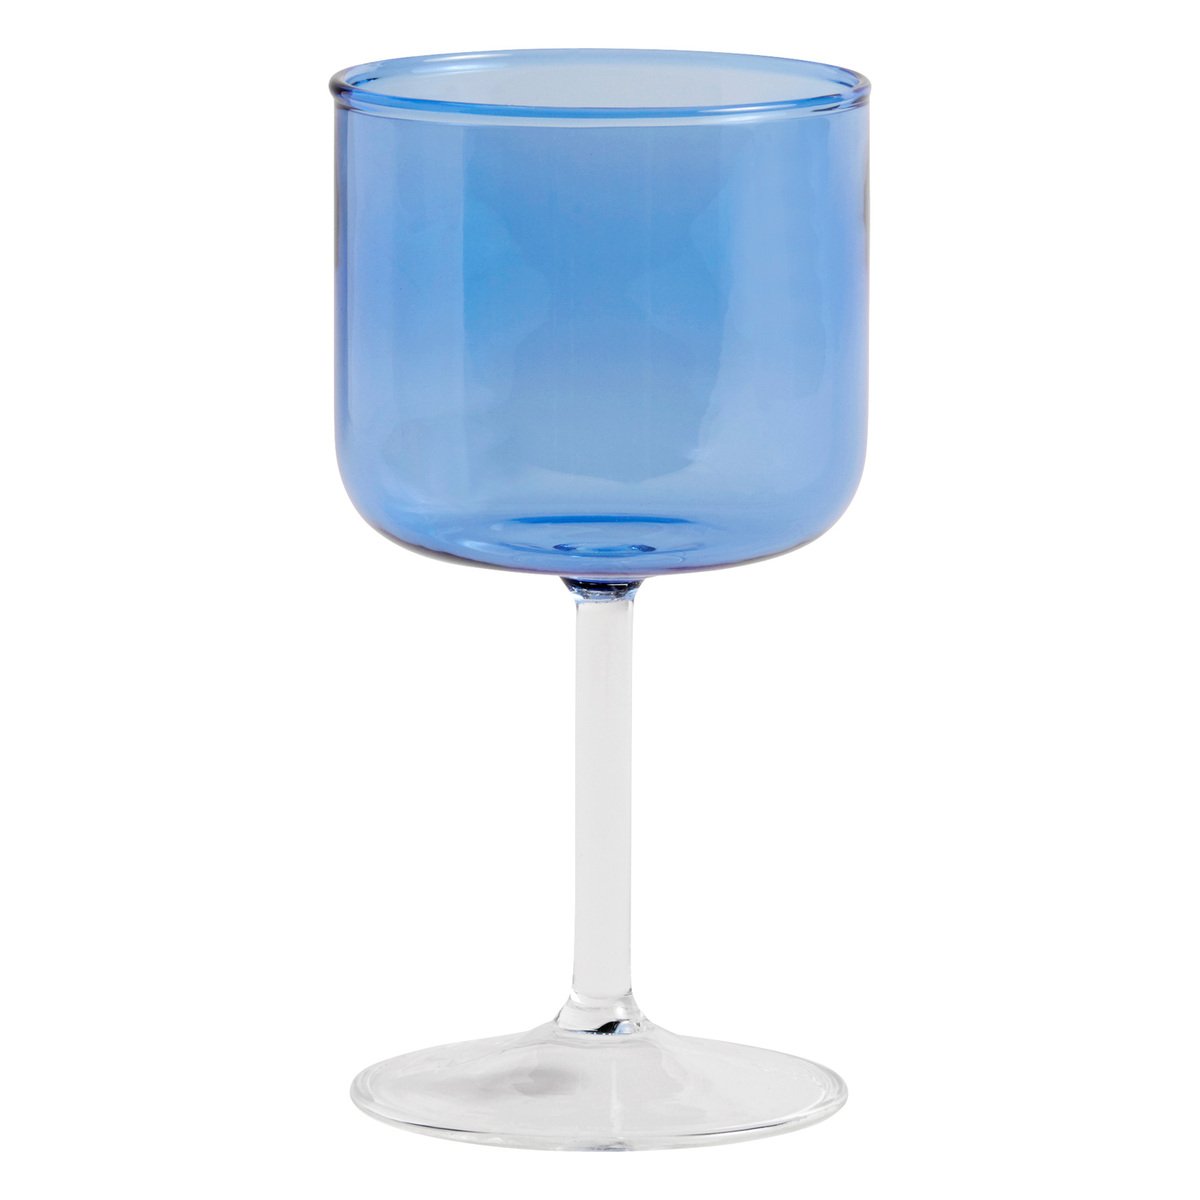 https://media.fds.fi/product_image/HA541221_Tint-Wineglass-Set-of-2-blue-and-clear_EE.jpg